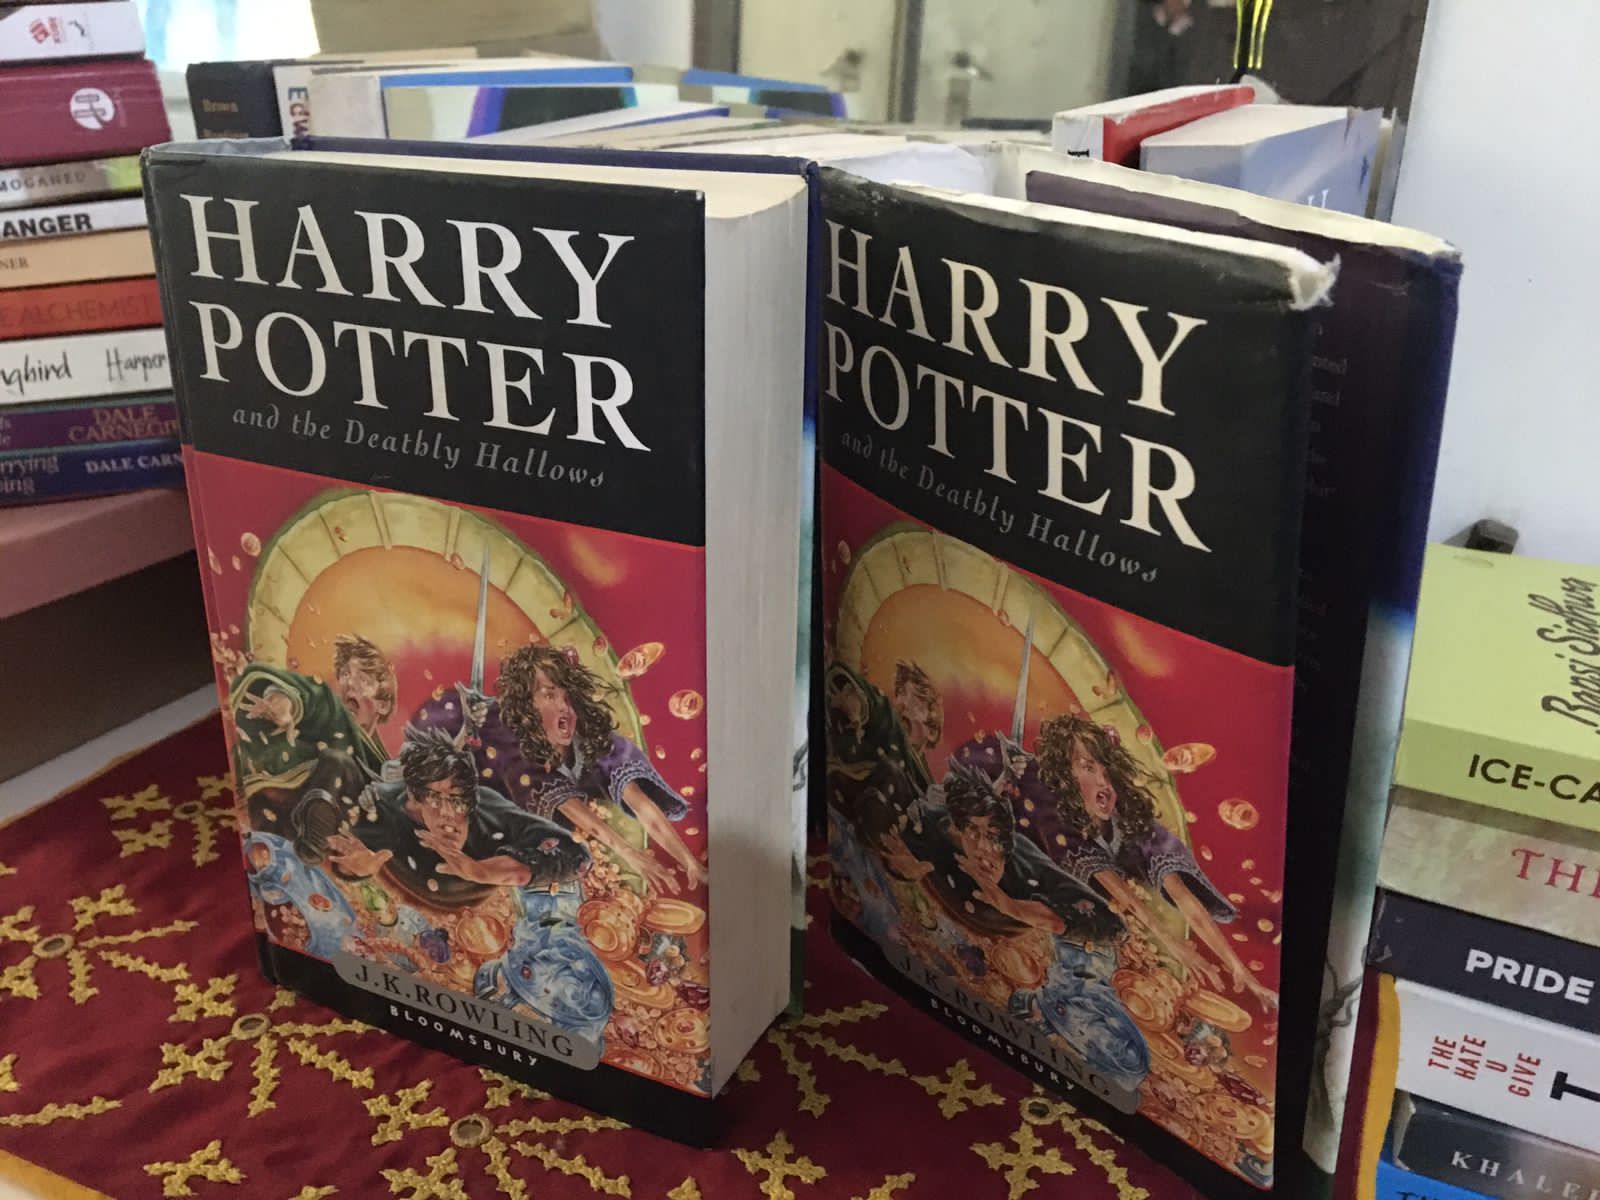 harry potter and the deathly hallows, first edition, rare book and  cover art by jason carcroft